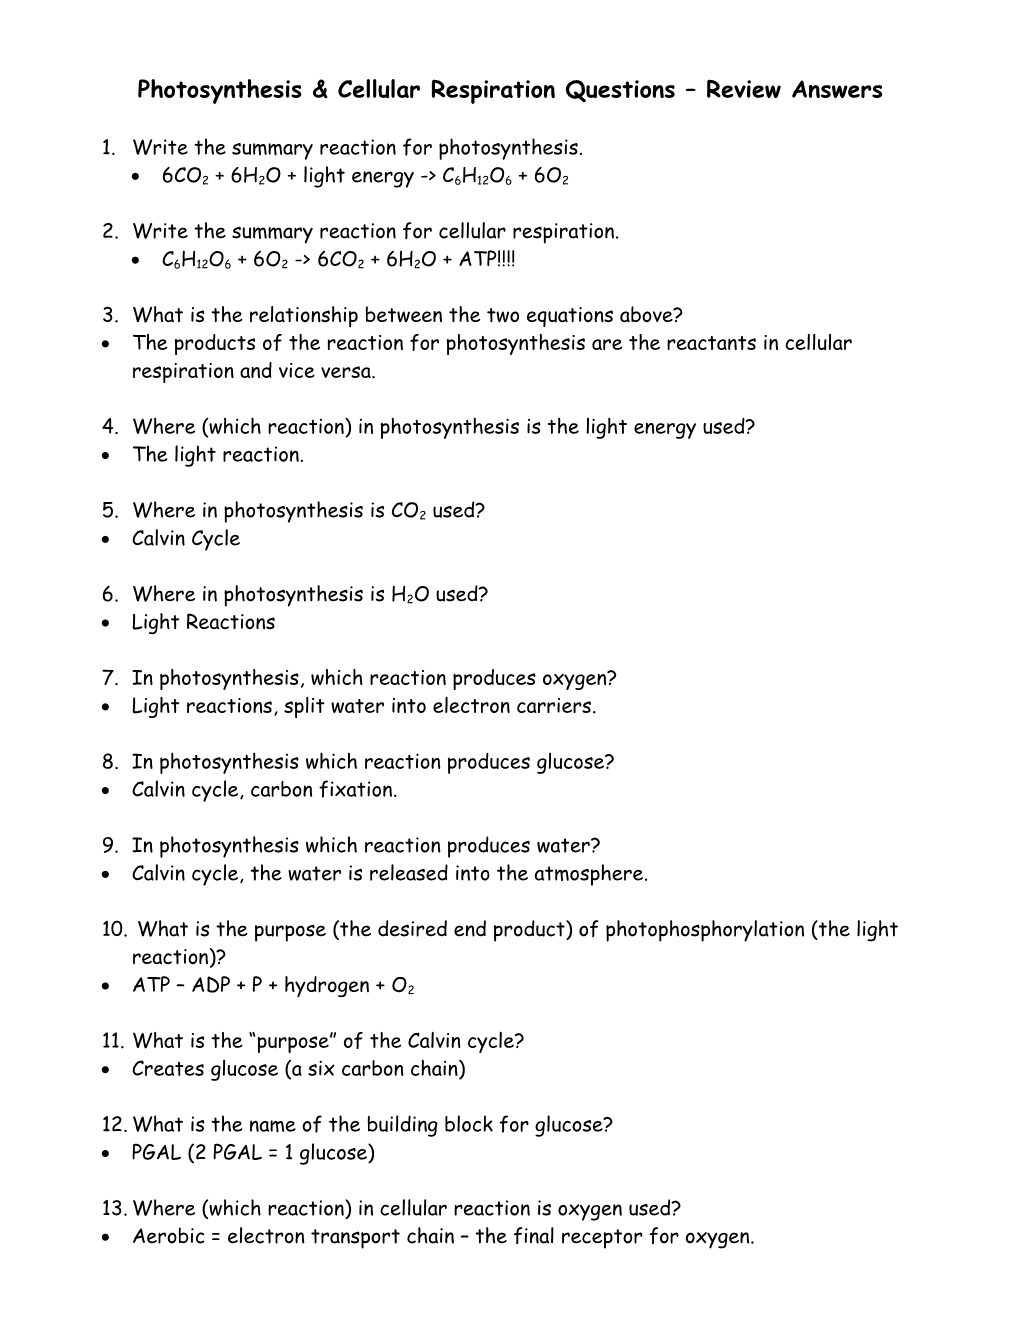 Photosynthesis & Cellular Respiration Questions Review Answers